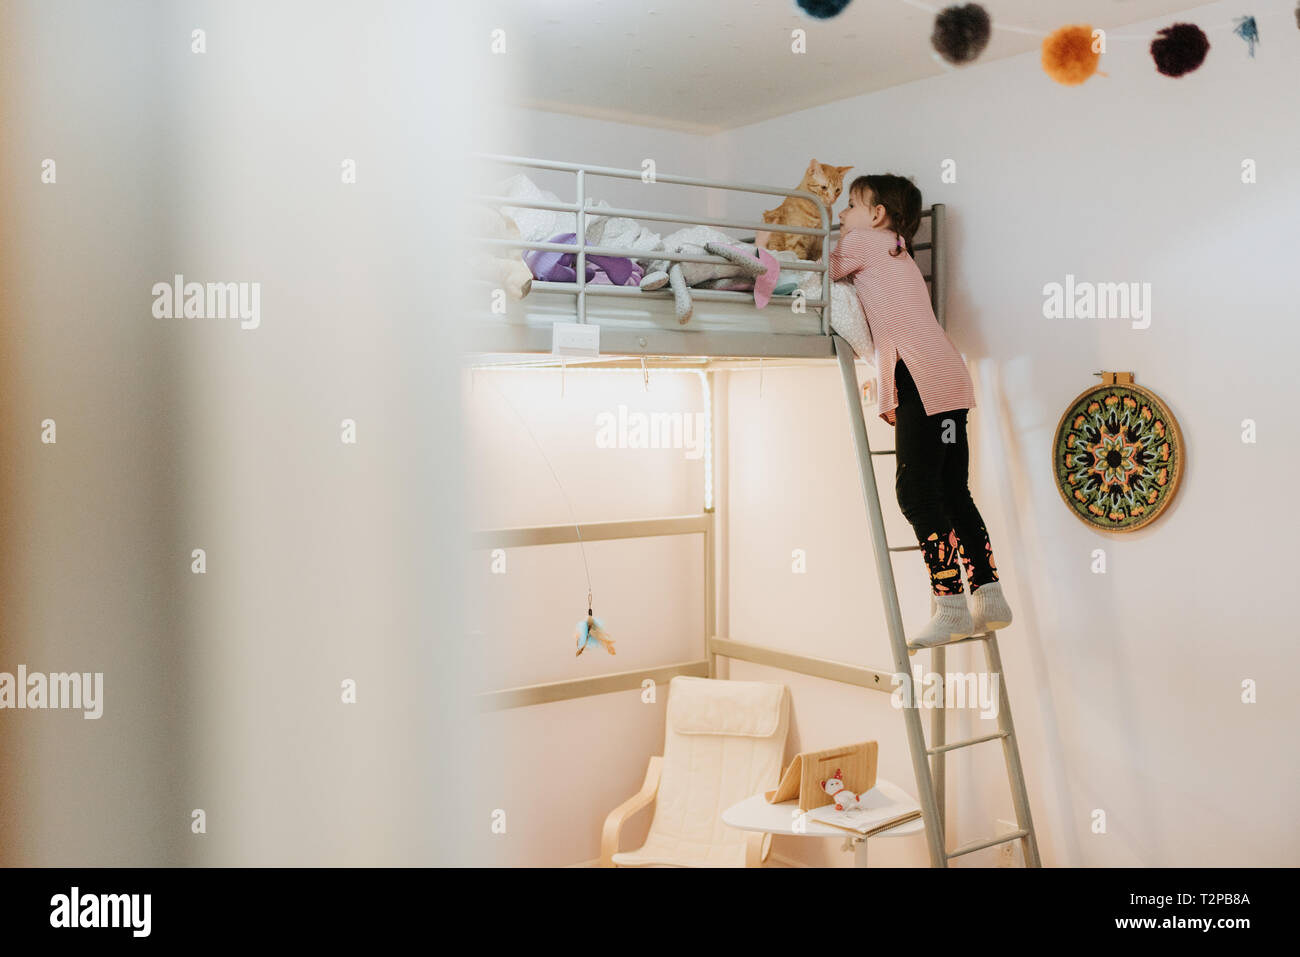 Girl playing with cat on loft bed Stock Photo